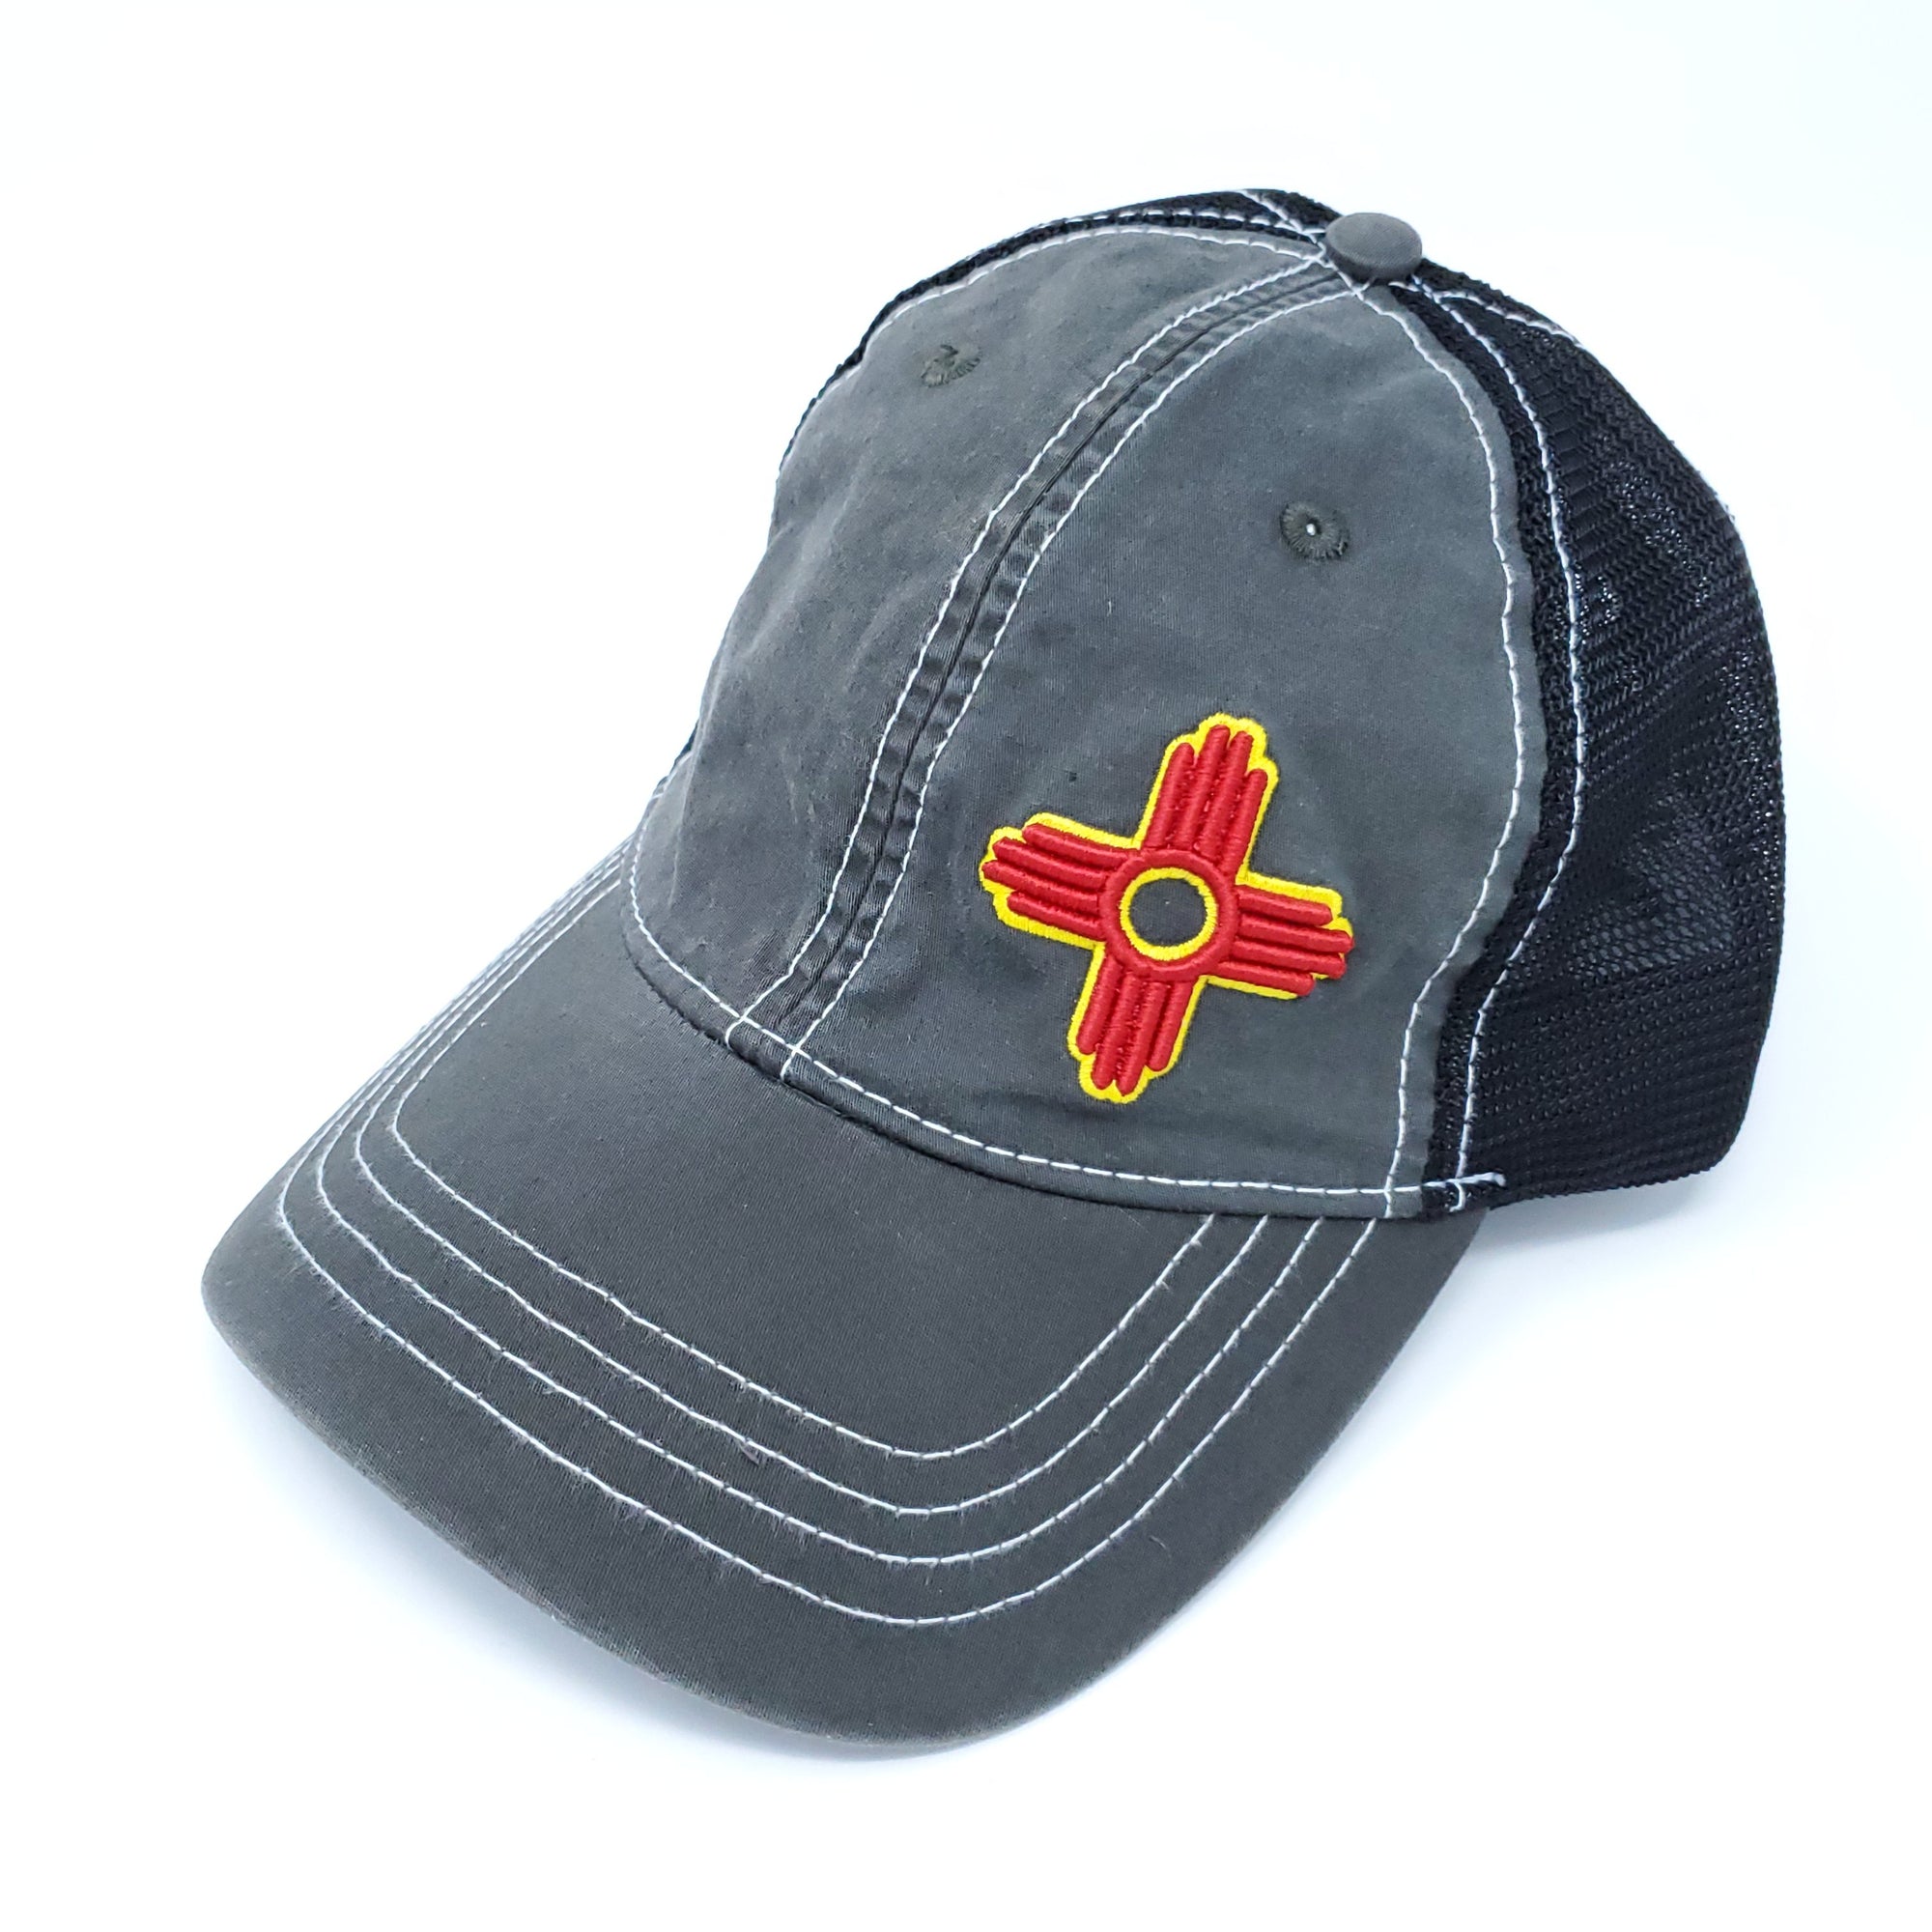 Vintage Trucker Style Snapback with Embroidered Zia Symbol - Ragged Apparel Screen Printing and Signs - www.nmshirts.com